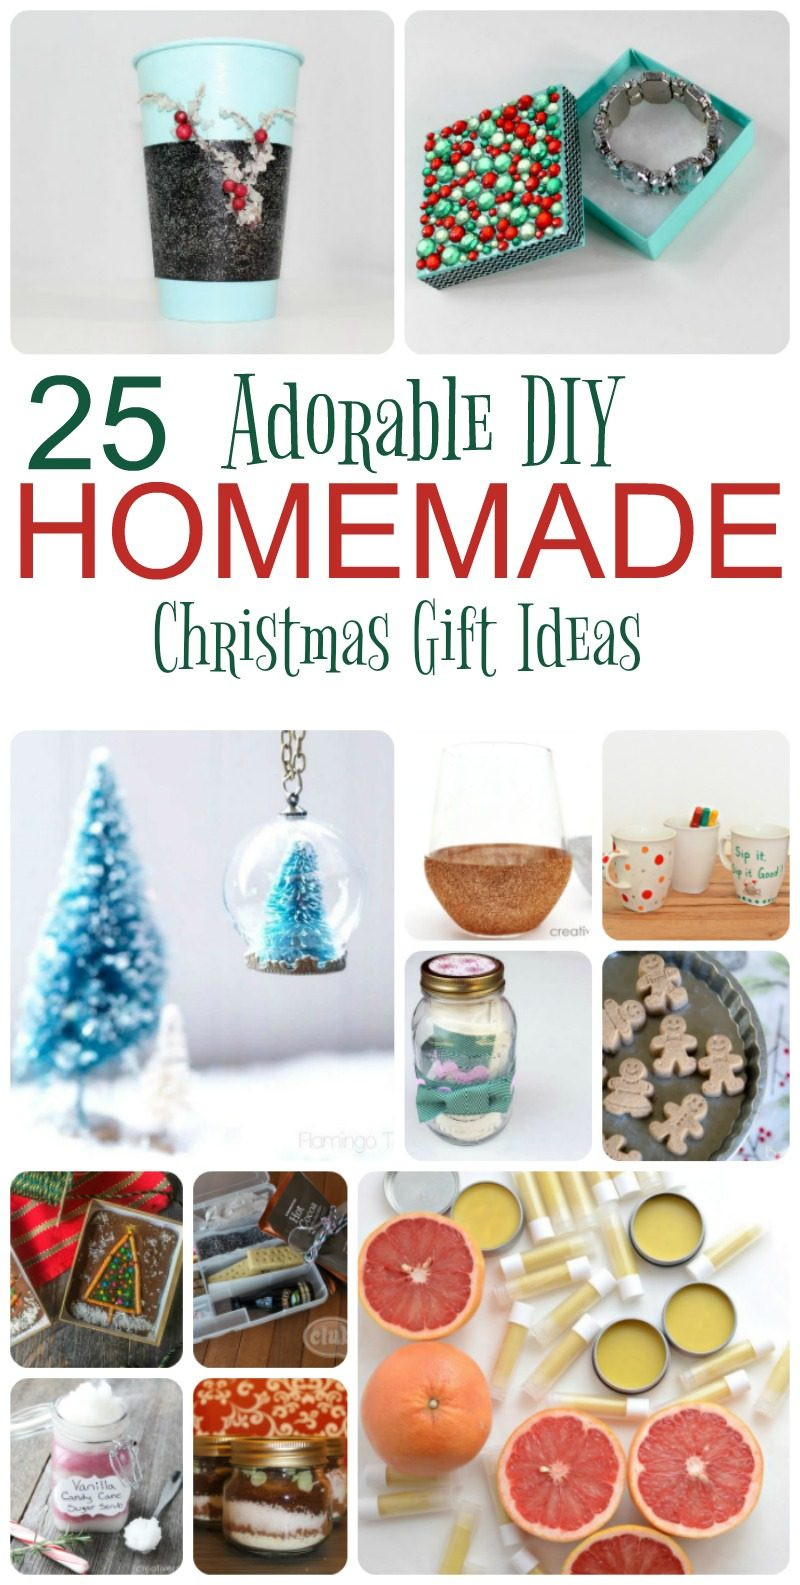 Meaningful Gifts For Kids
 25 Adorable Homemade Gifts to Make for Christmas Pretty